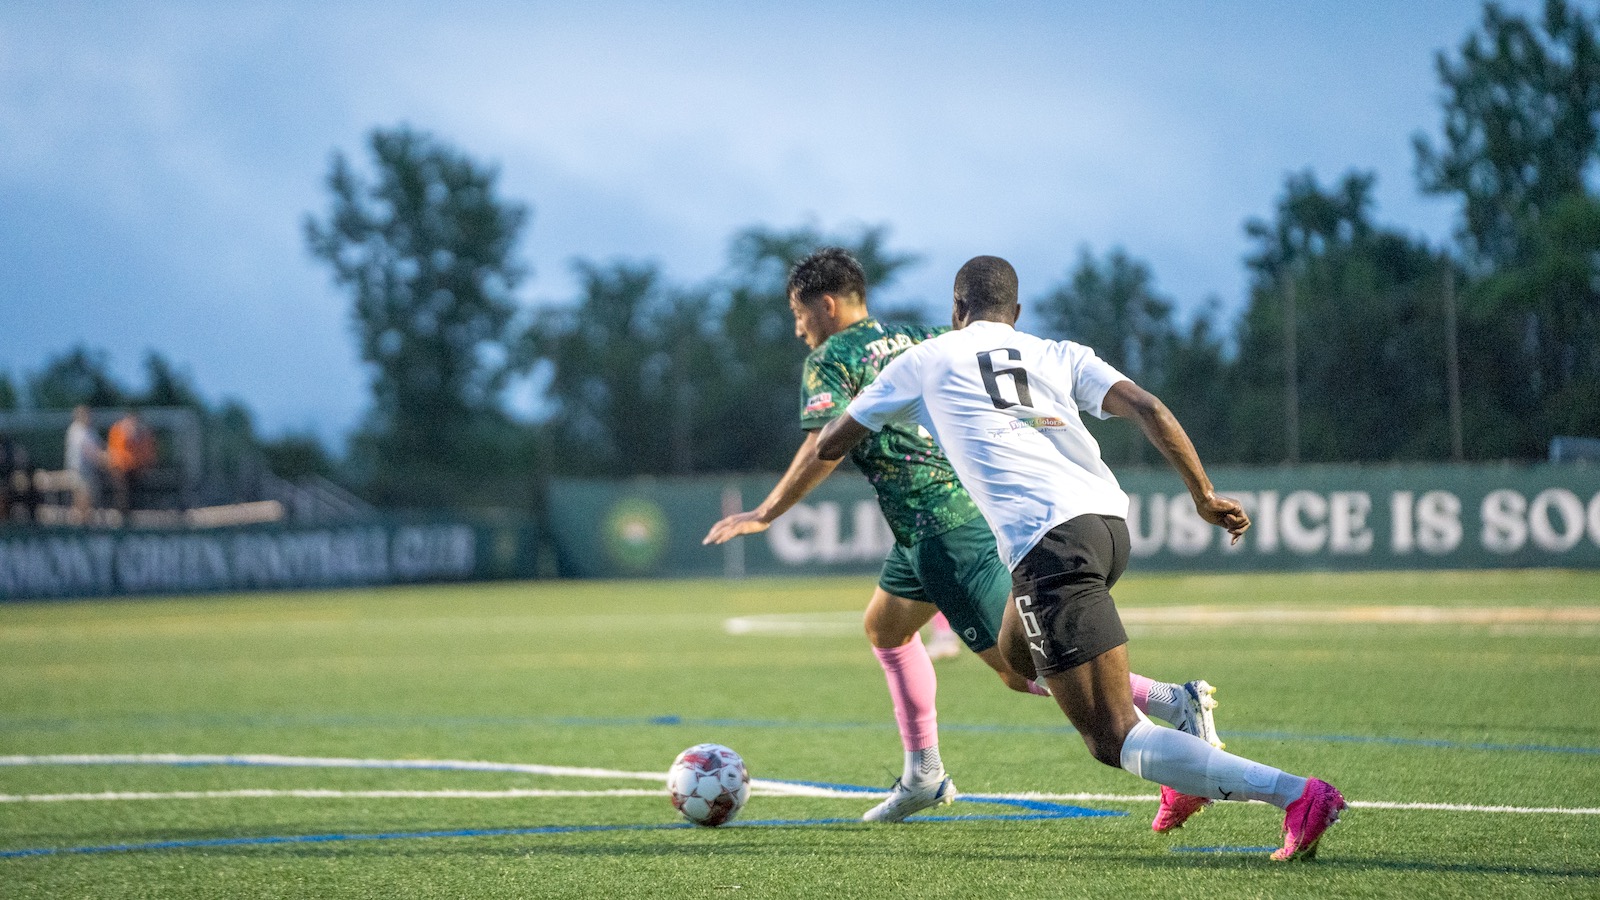 Two soccer players, one in a green jersey and the other in a white jersey, chase the ball over the green pitch. A banner in the background reads, 